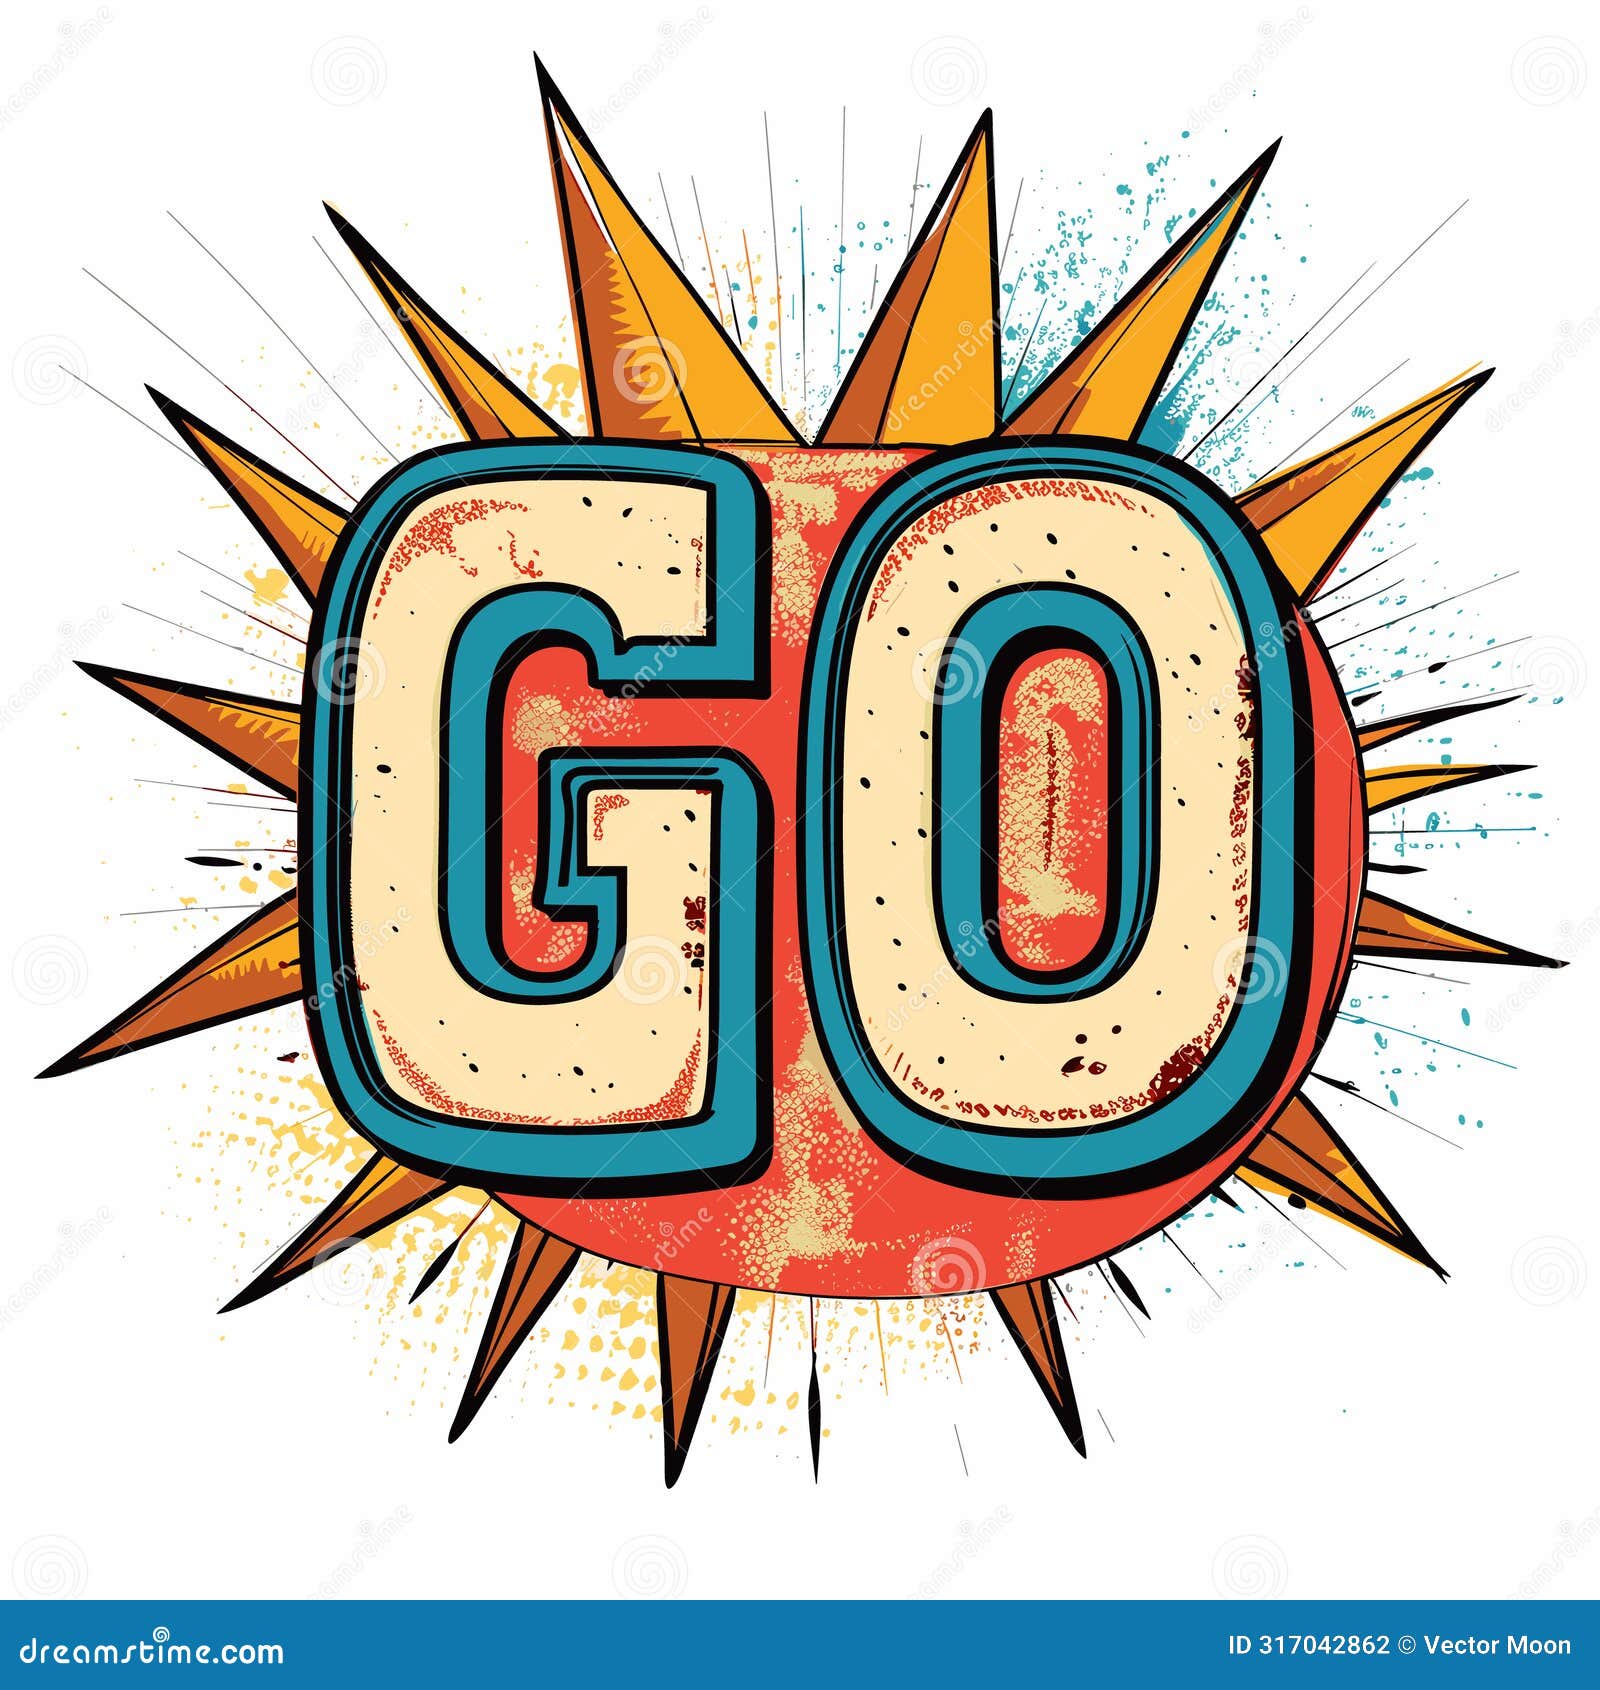 comic book style word go explosion background. bold lettering suggests movement, action, starting